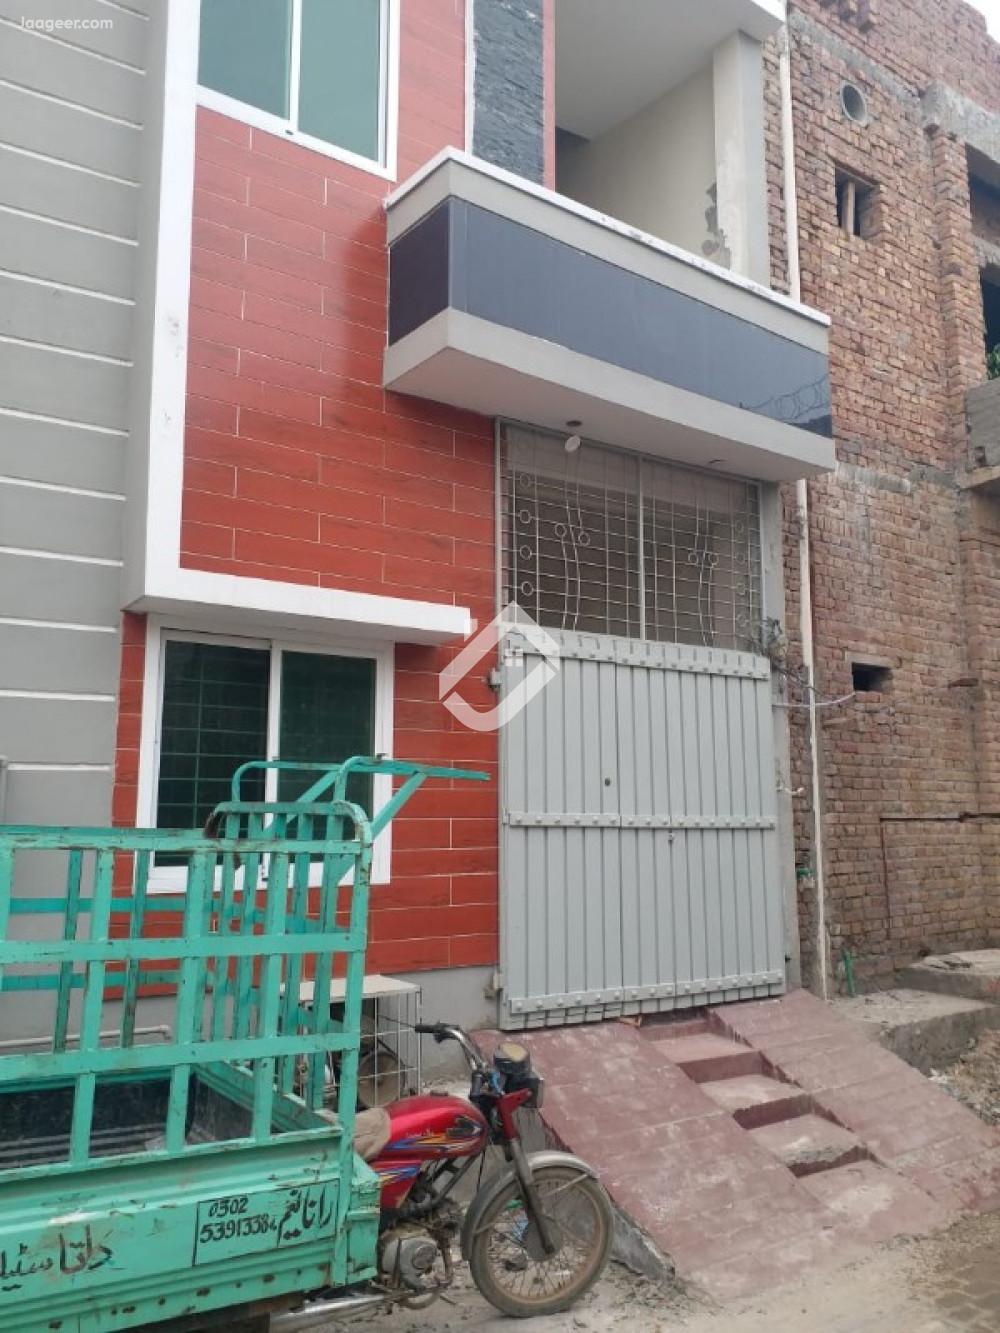 View  3 Marla Double Storey House For Sale In Bashir Colony  9 No Chungi   in Bashir Colony, Sargodha